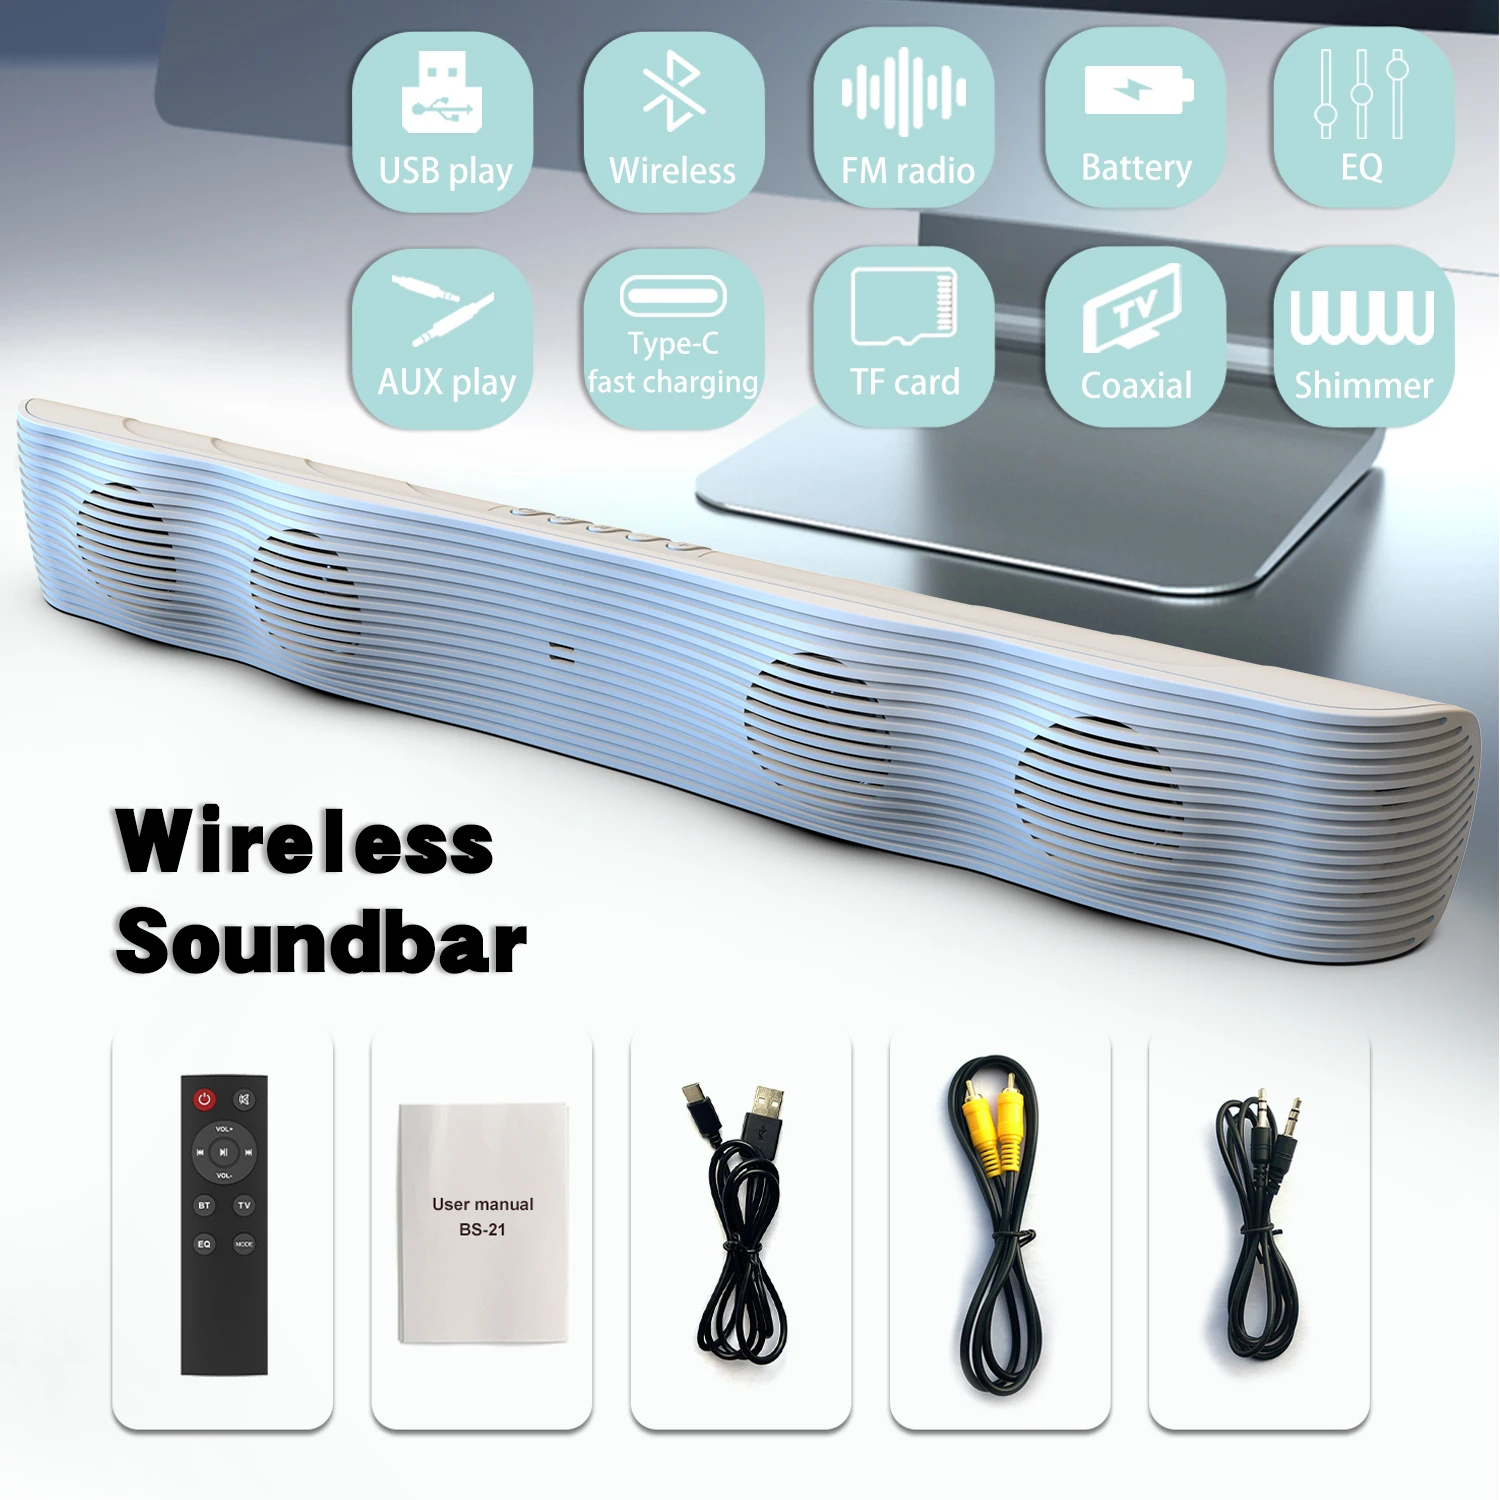 

BS-21 Wireless Bluetooth 5.0 Speaker Stereo Surround Three EQ Home Theater Speakers with Radio/TF/USB Drive